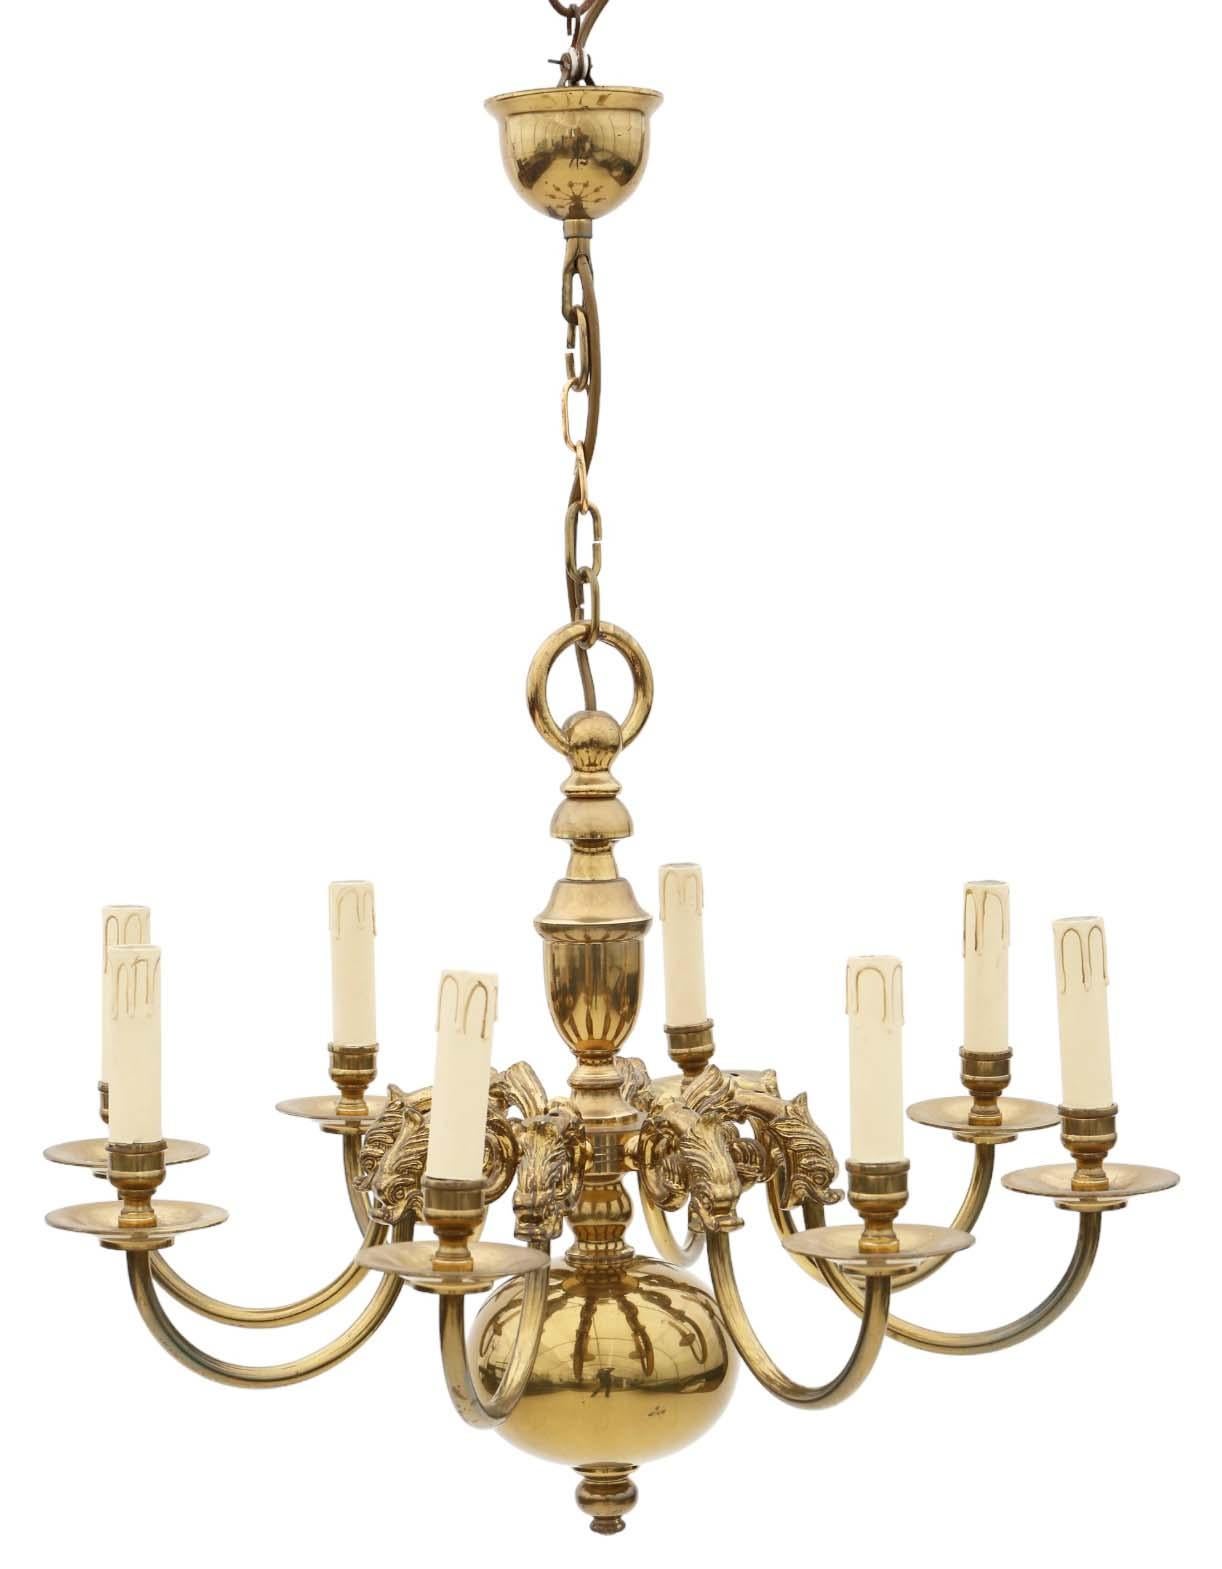 Antique Vintage Ormolu Brass Chandelier with 8 Lamps/Arms In Good Condition For Sale In Wisbech, Cambridgeshire